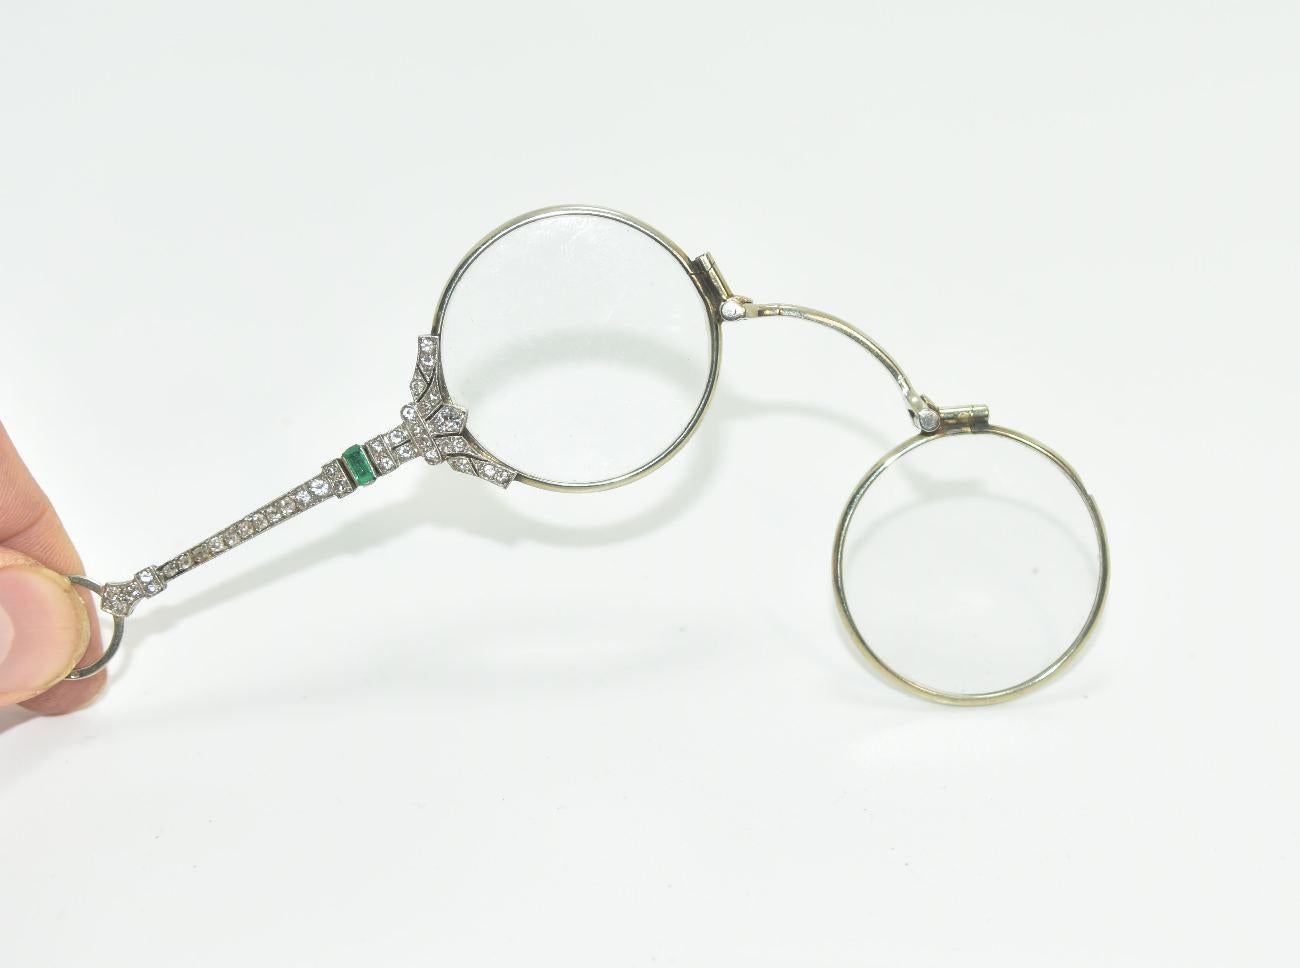 Binocular or hand-facing in brilliant white gold and emerald from the 19th century, no traces of goldsmith's hallmarks, yet the quality of the goldsmith's work is remarkable, work to be compared to the Maison Cartier or the Maison Fabergé, note that